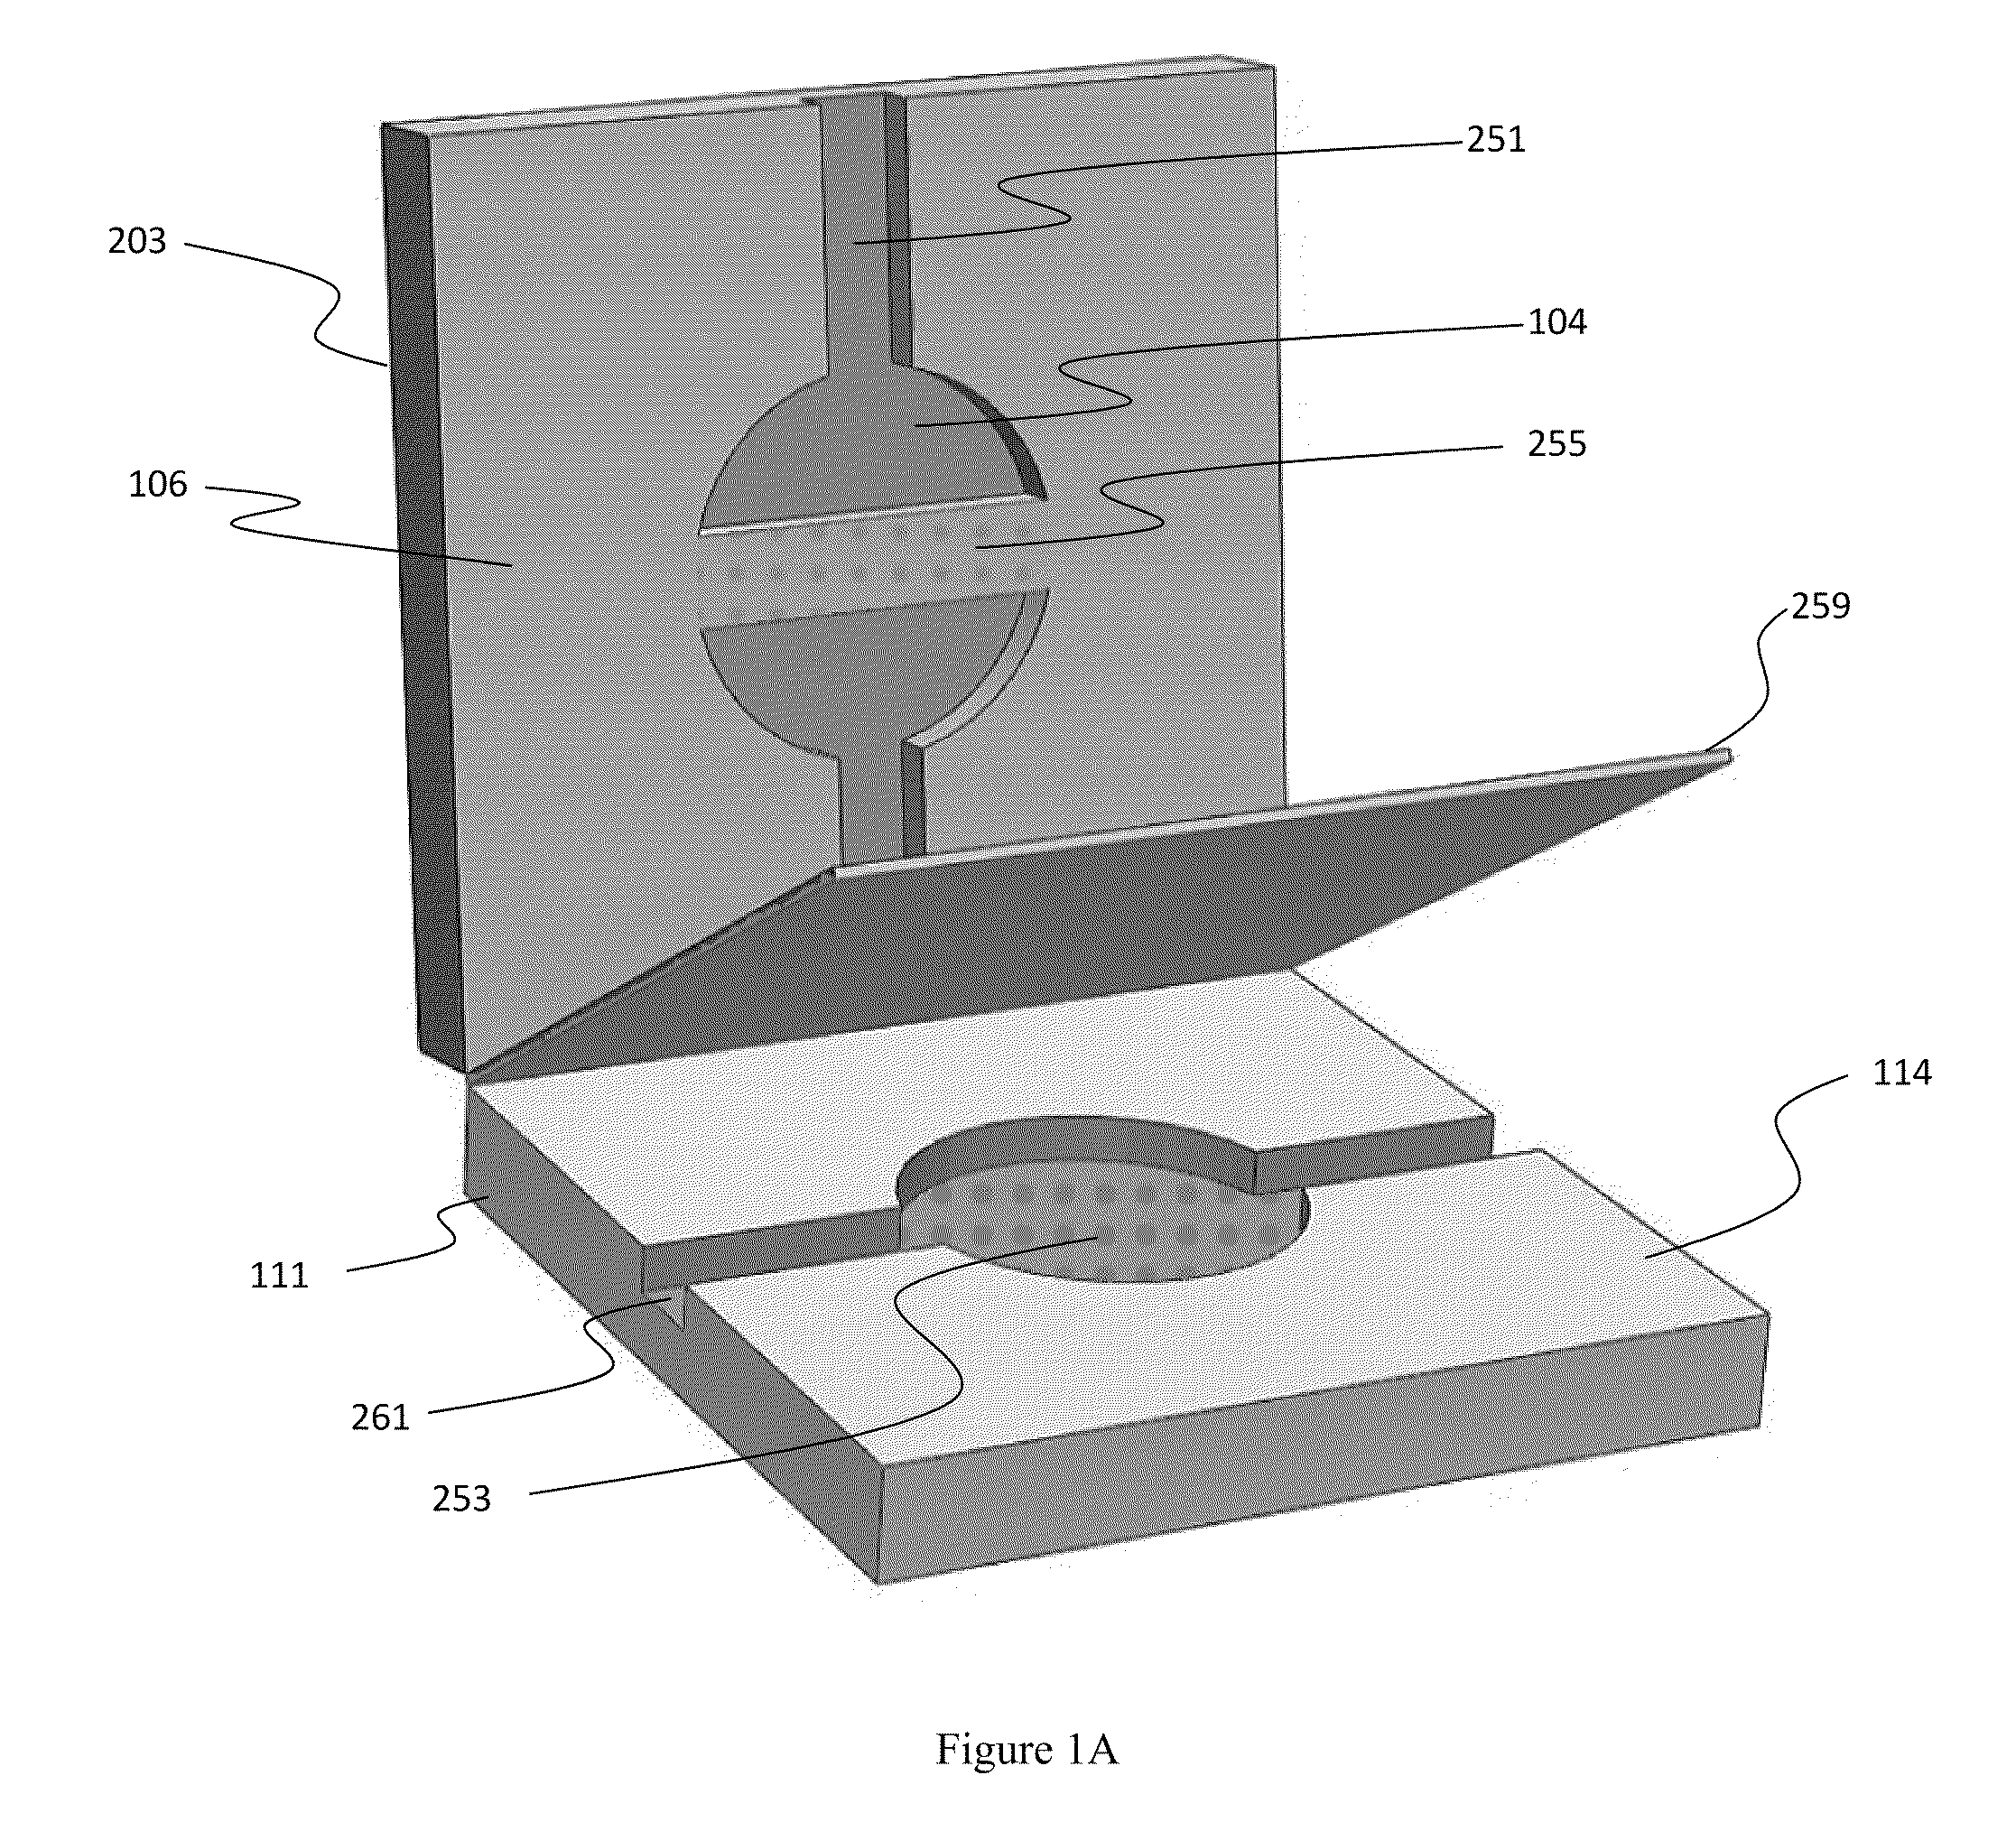 Universal sample preparation system and use in an integrated analysis system